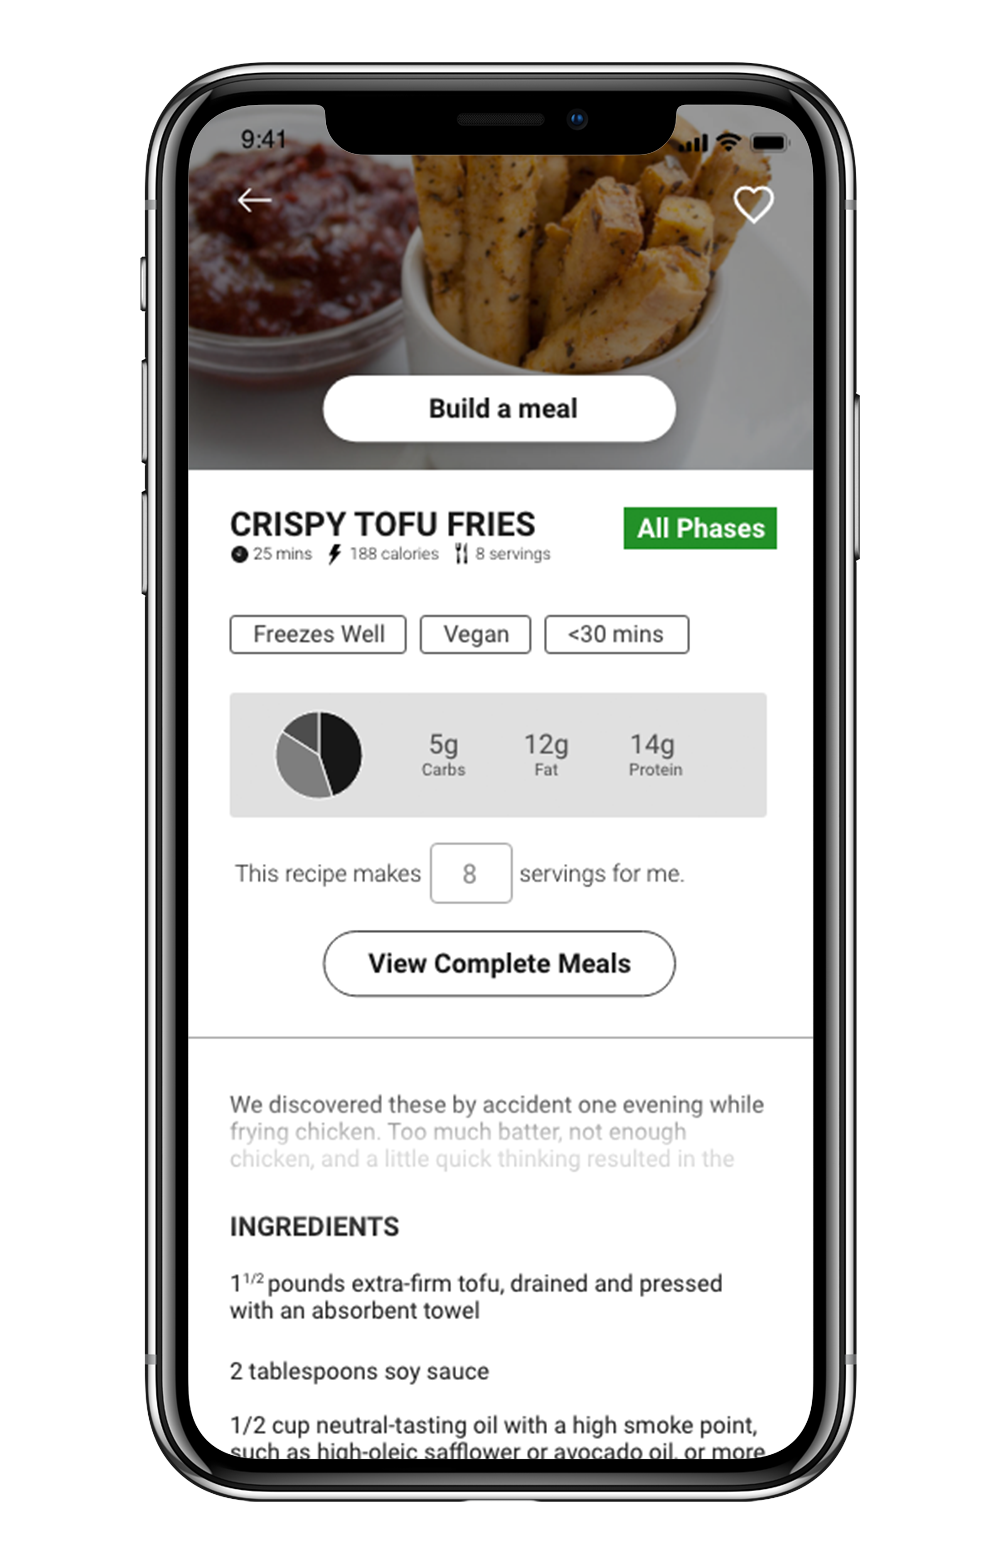 App page showing details of a recipe.